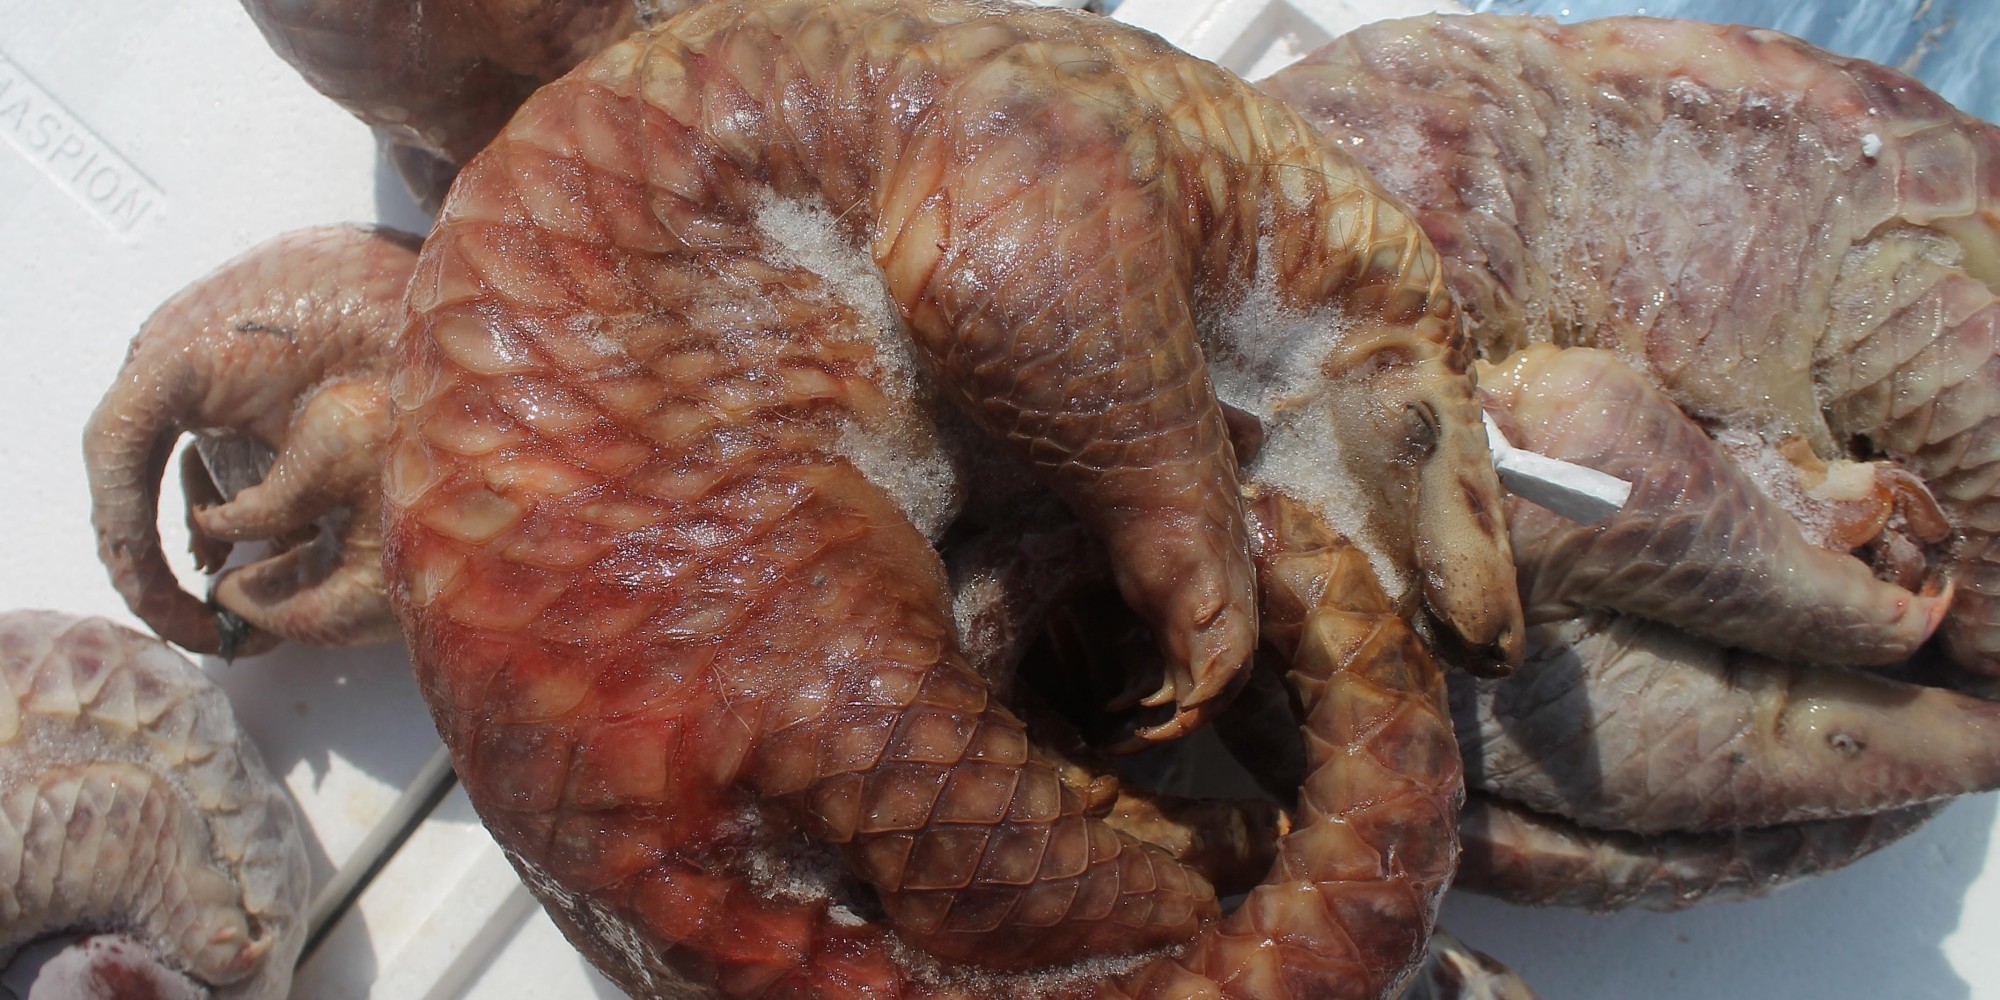 This Is How A Species Goes Extinct: More Than A Ton Of Frozen Pangolin Meat Seized In ...2000 x 1000